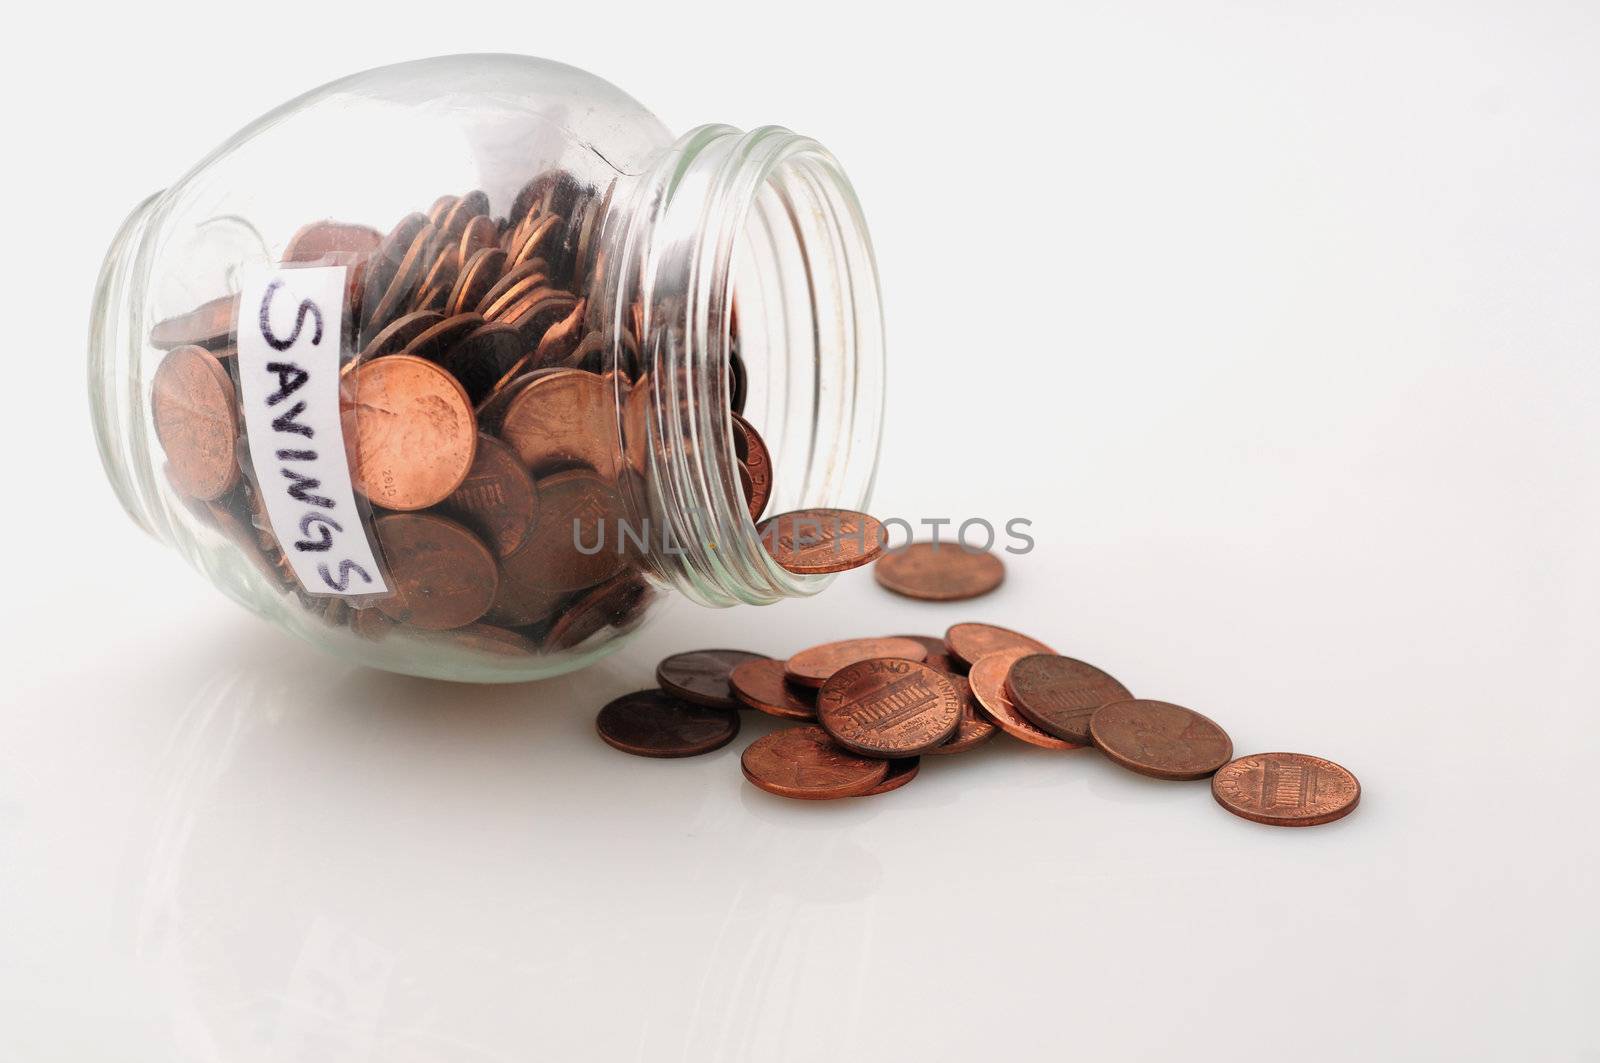 A concept image of jar with pennies to signify saving money or saving pennies